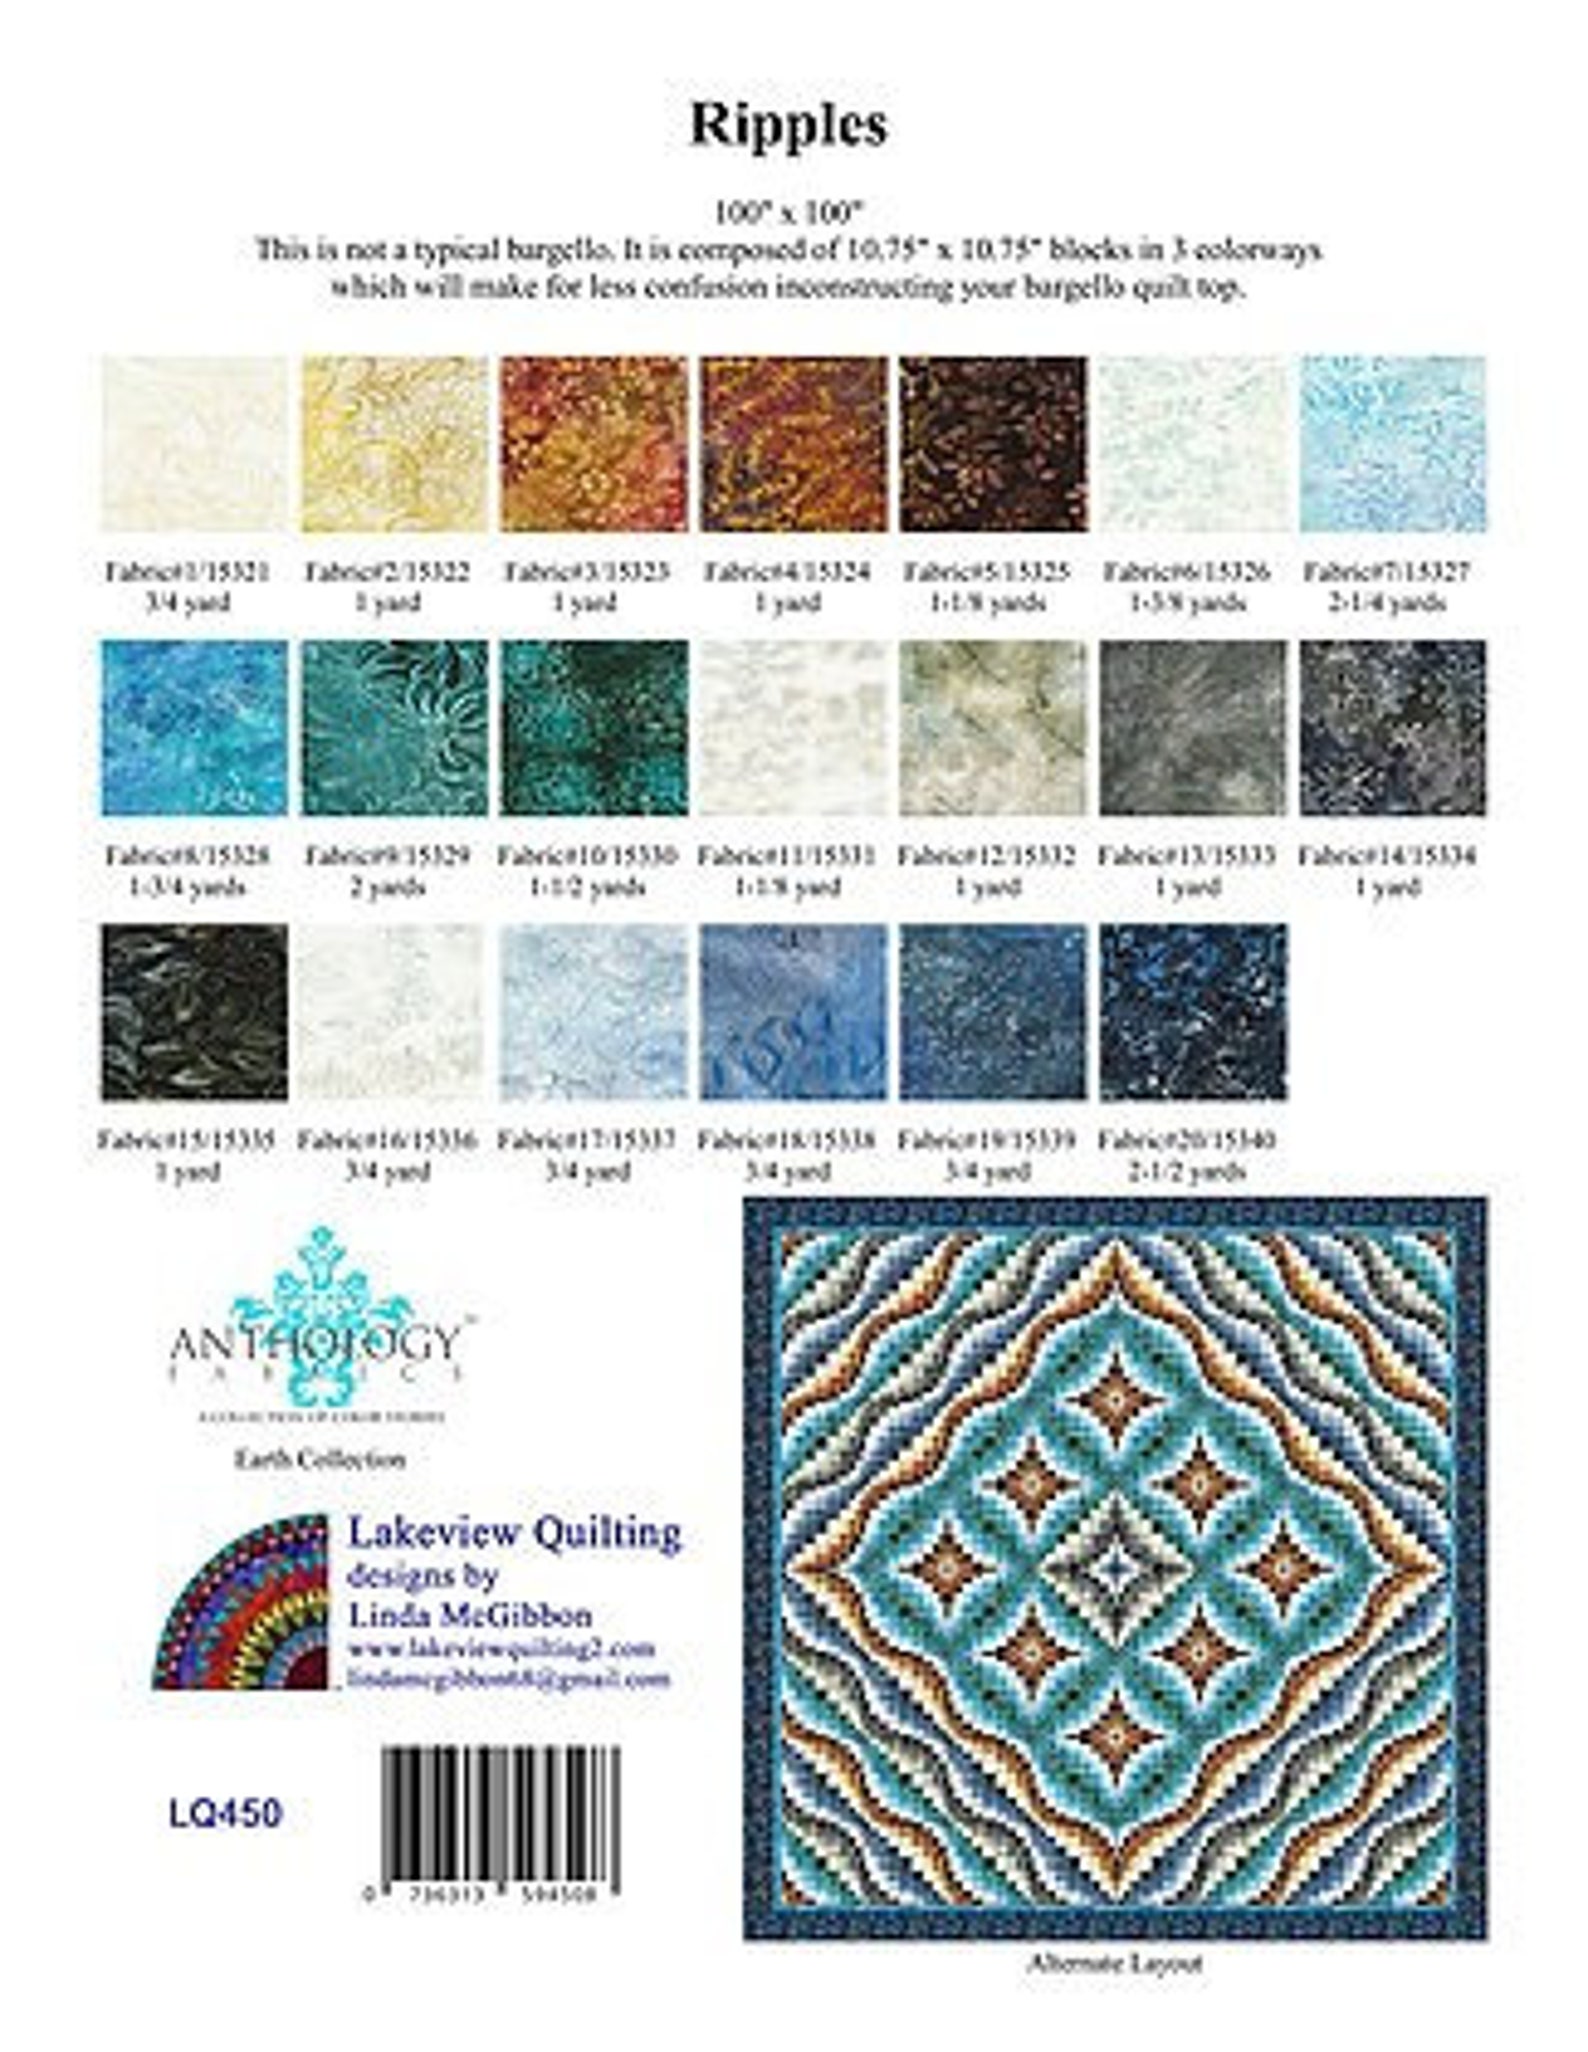 Lakeview Quilts Ripples Pattern - Etsy